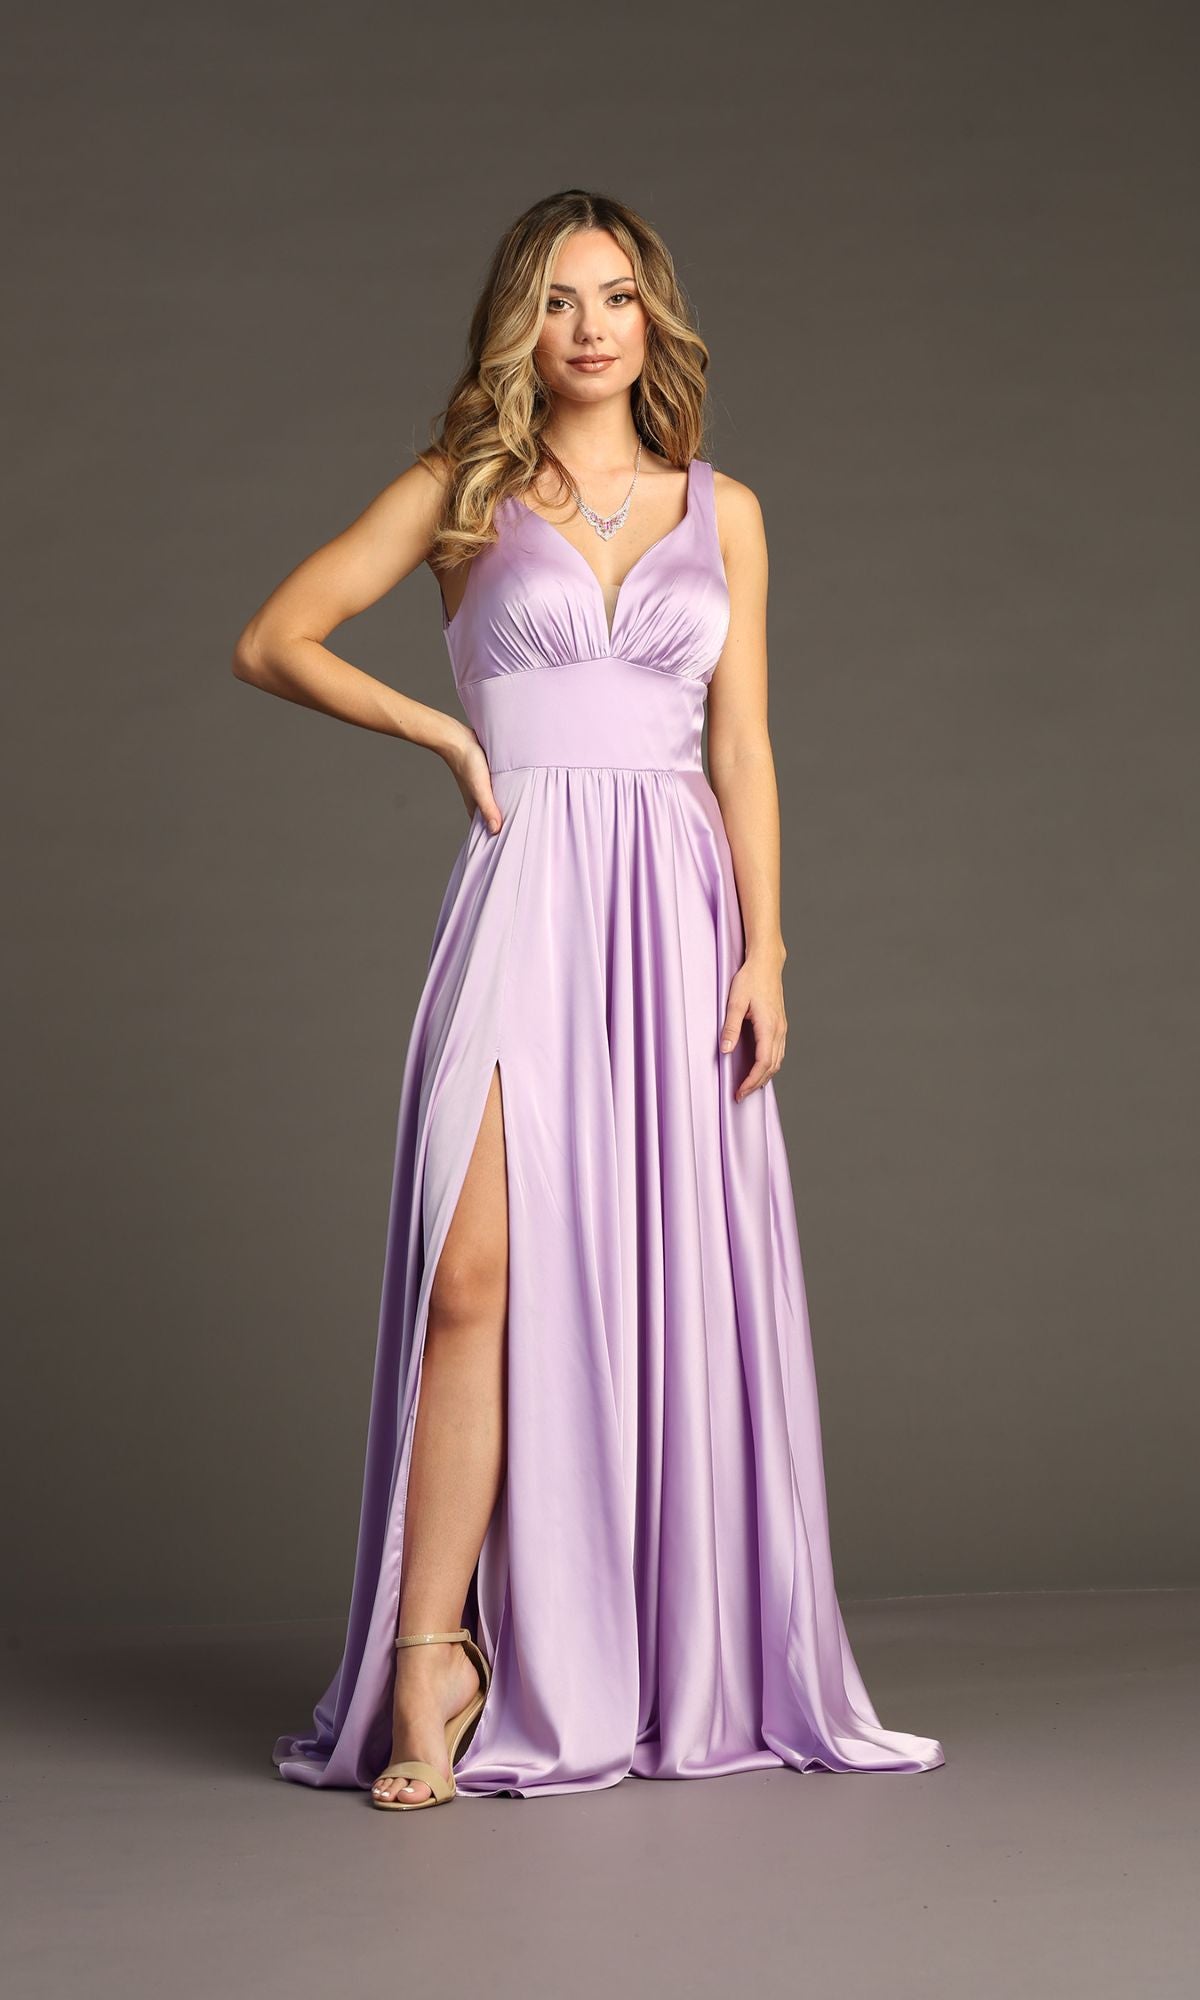 Long Prom Dress C242 by Chicas